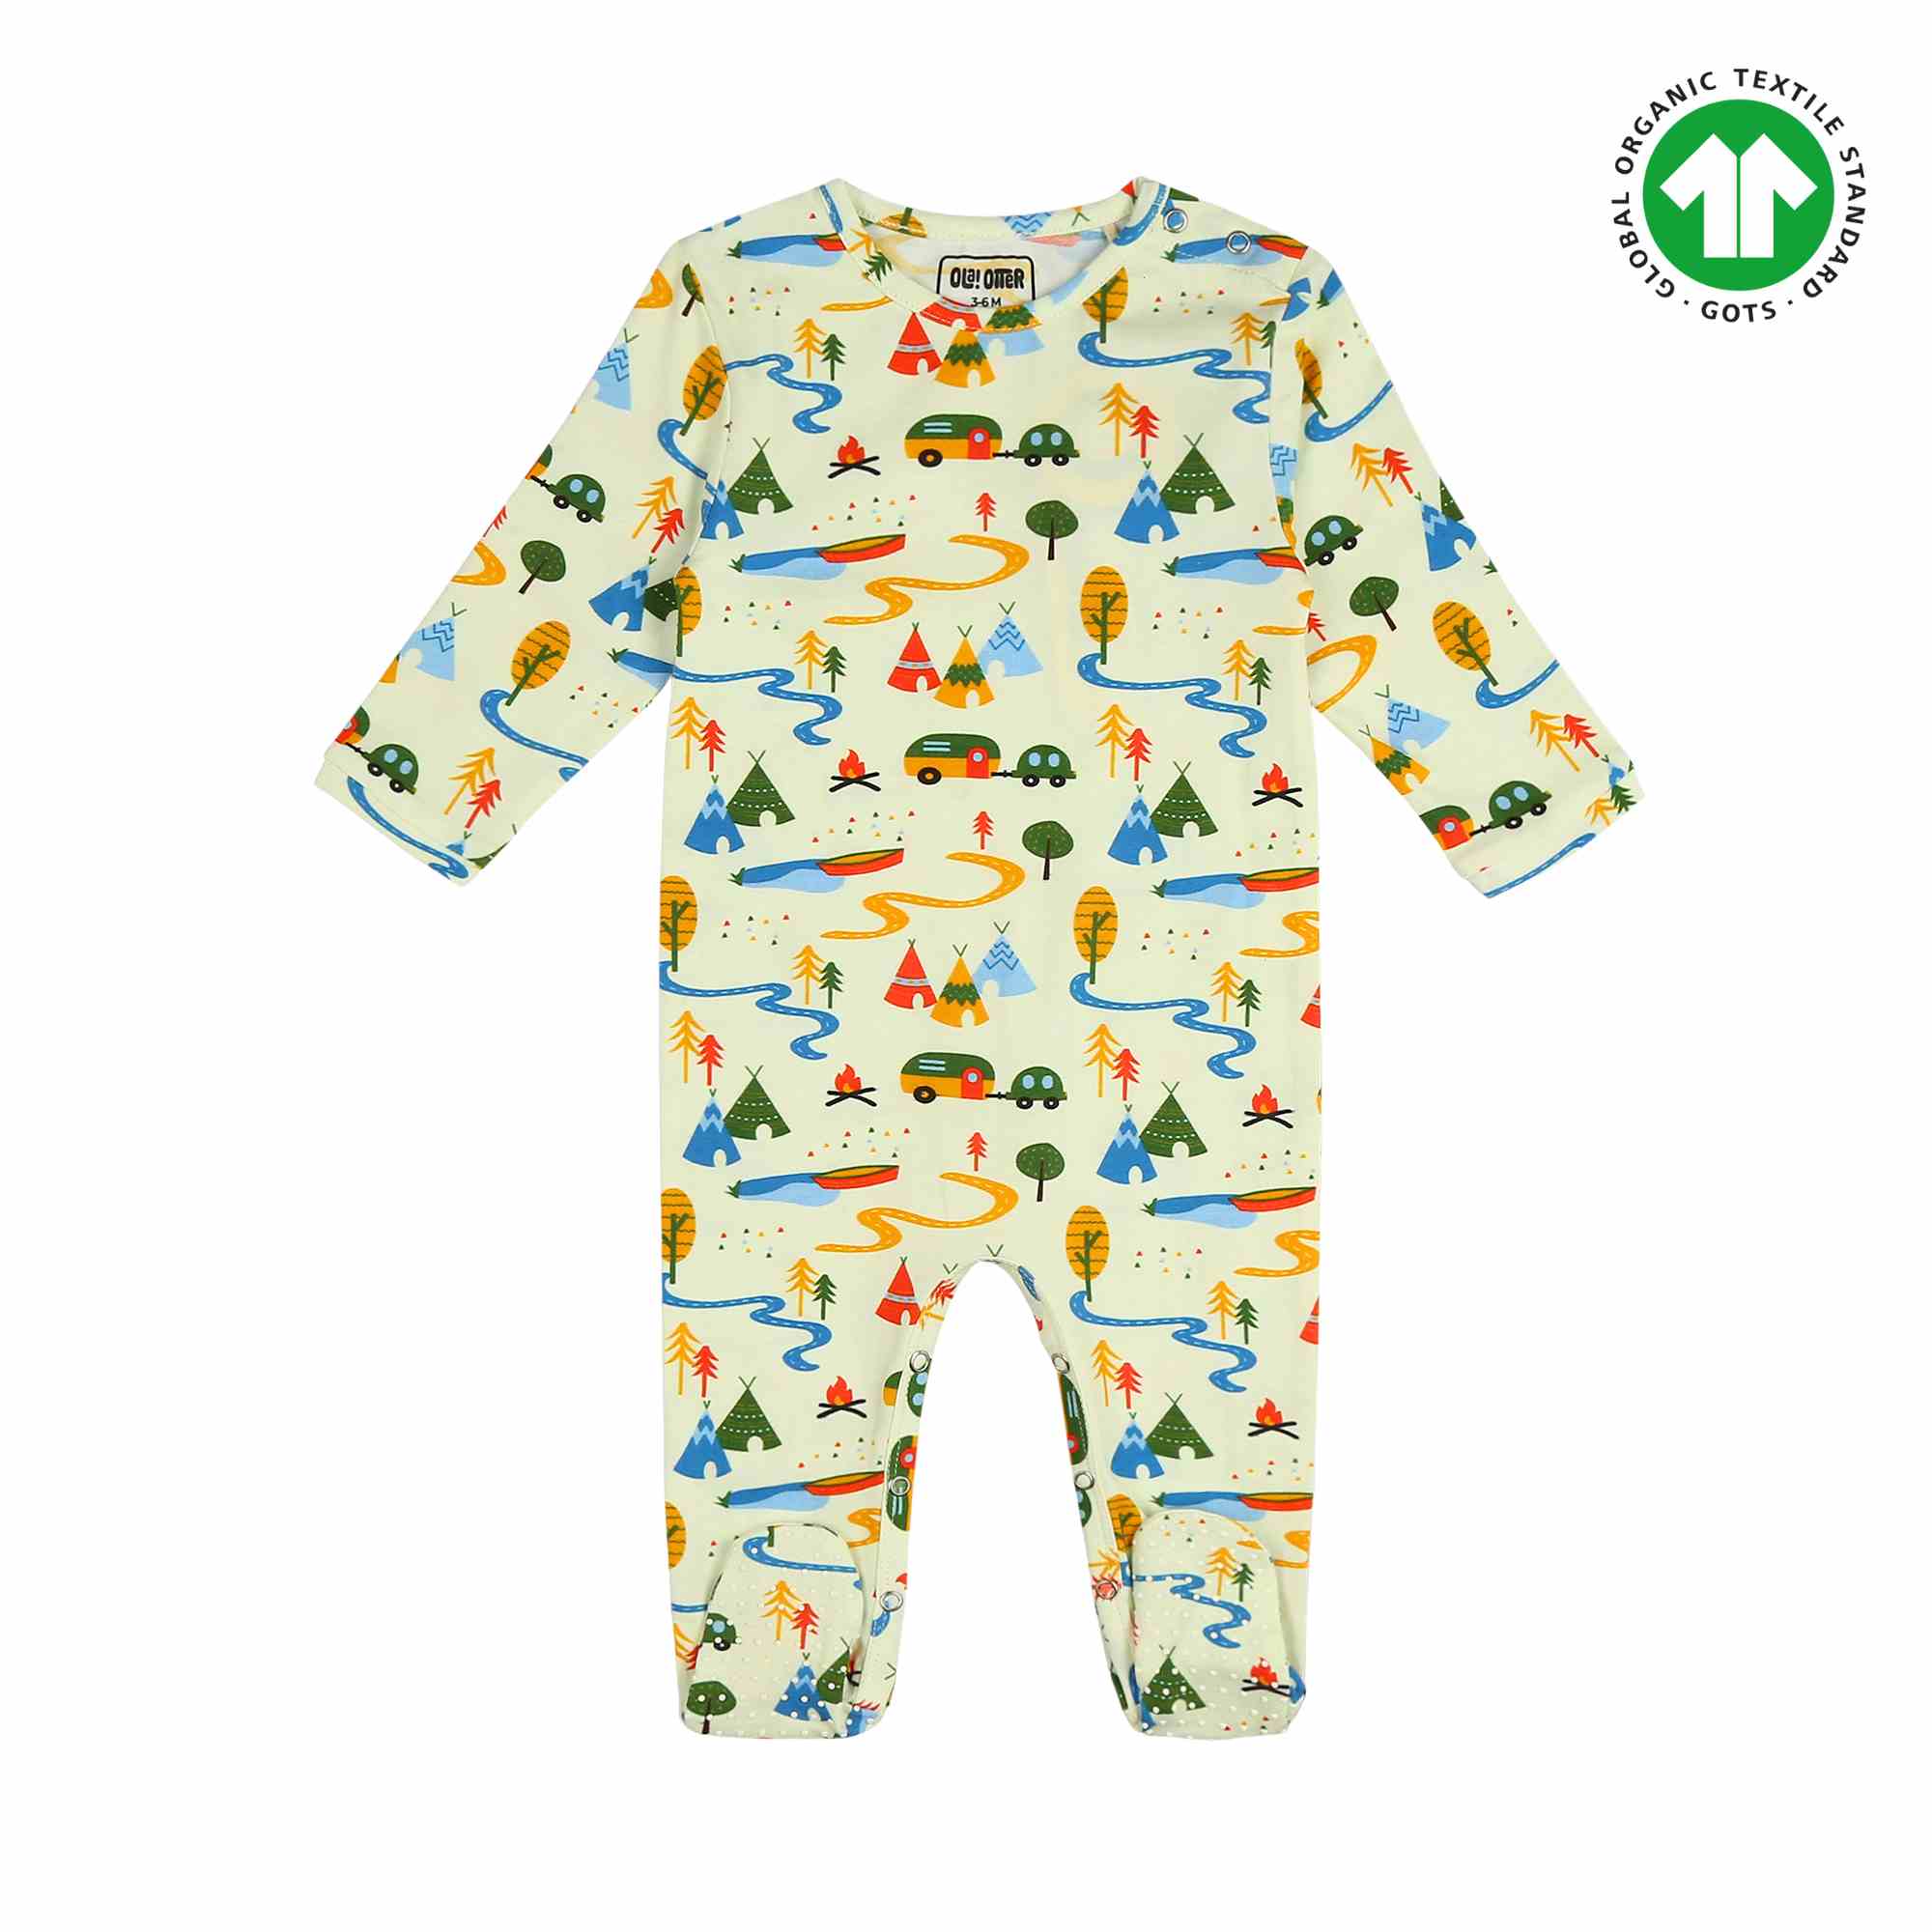 Sleepsuits for babies